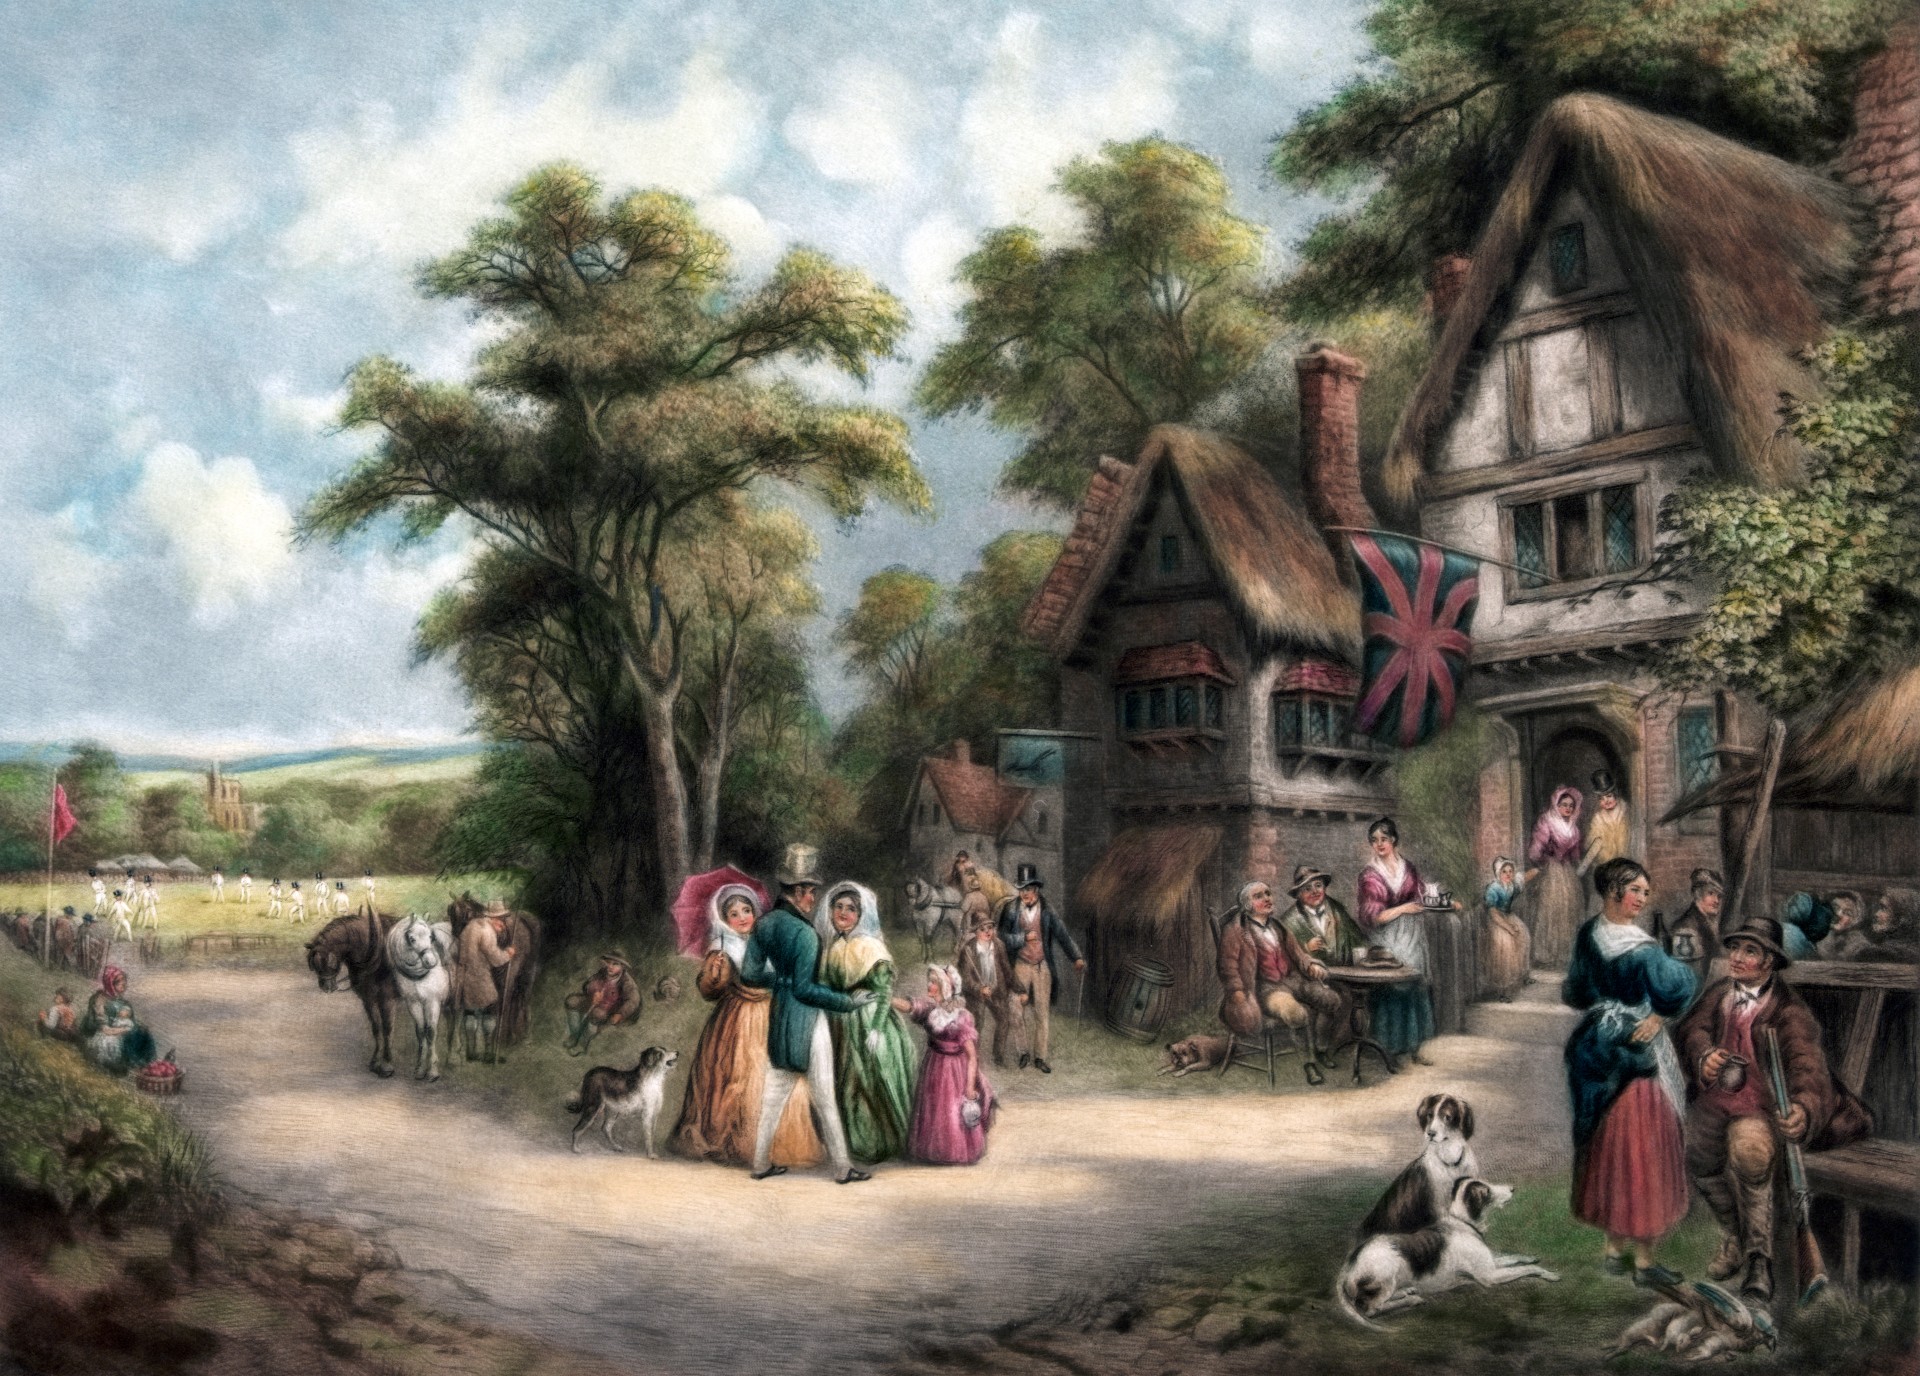 Public domain vintage painting of life in a rural english village